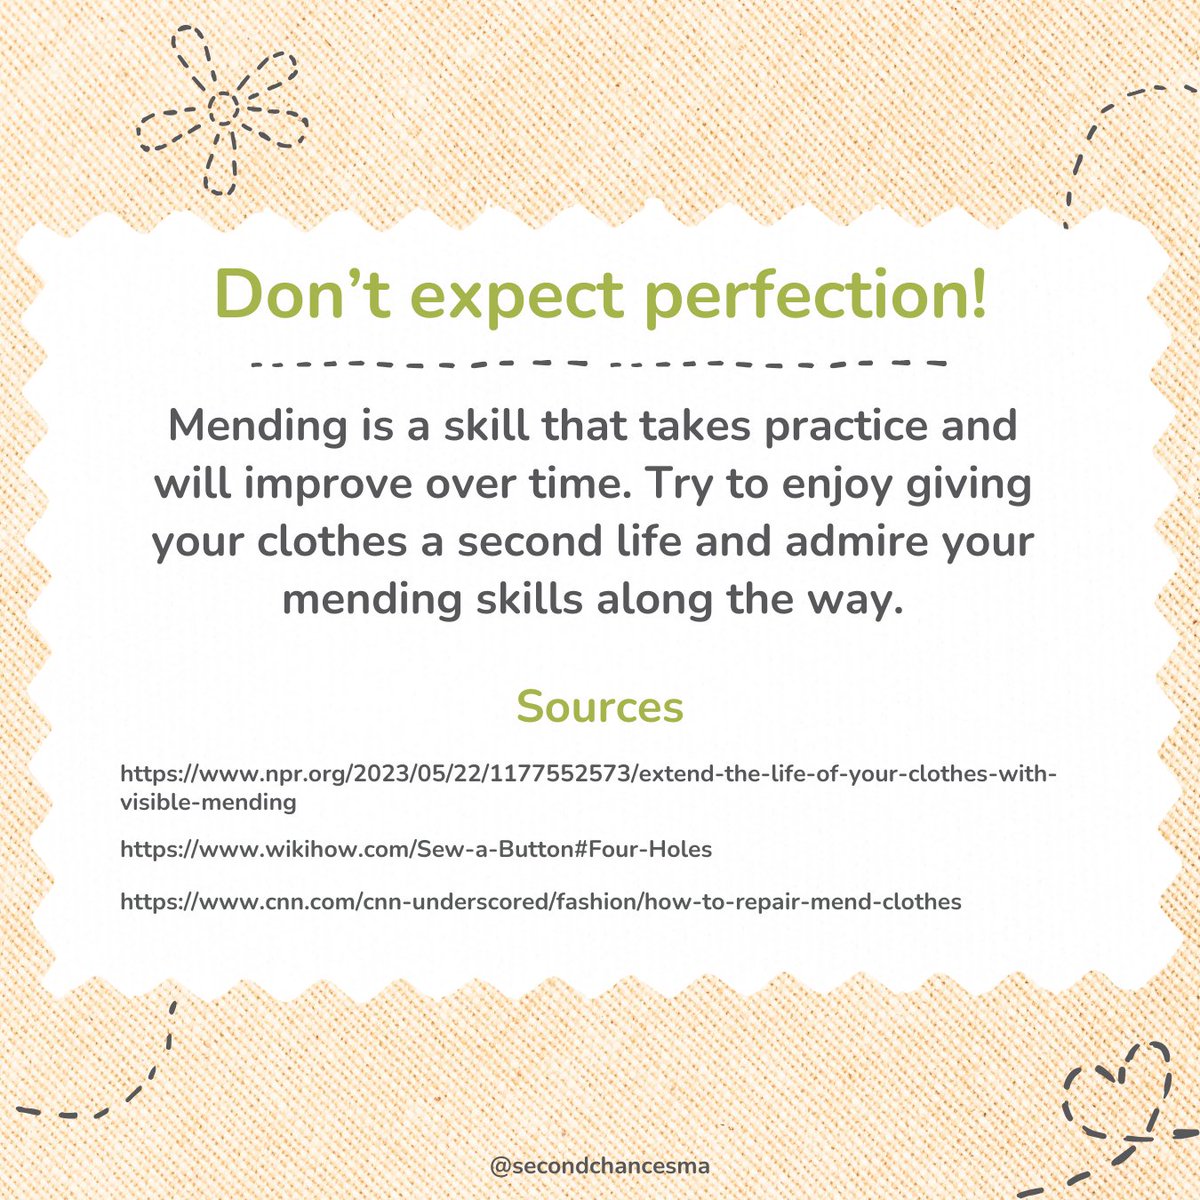 Enjoy giving your clothes a second life and building your mending skills along the way!

#sustainability #visiblemending #mending #repair #darning #lovedclotheslast #reducewaste #slowfashion #sustainablefashion #secondchances